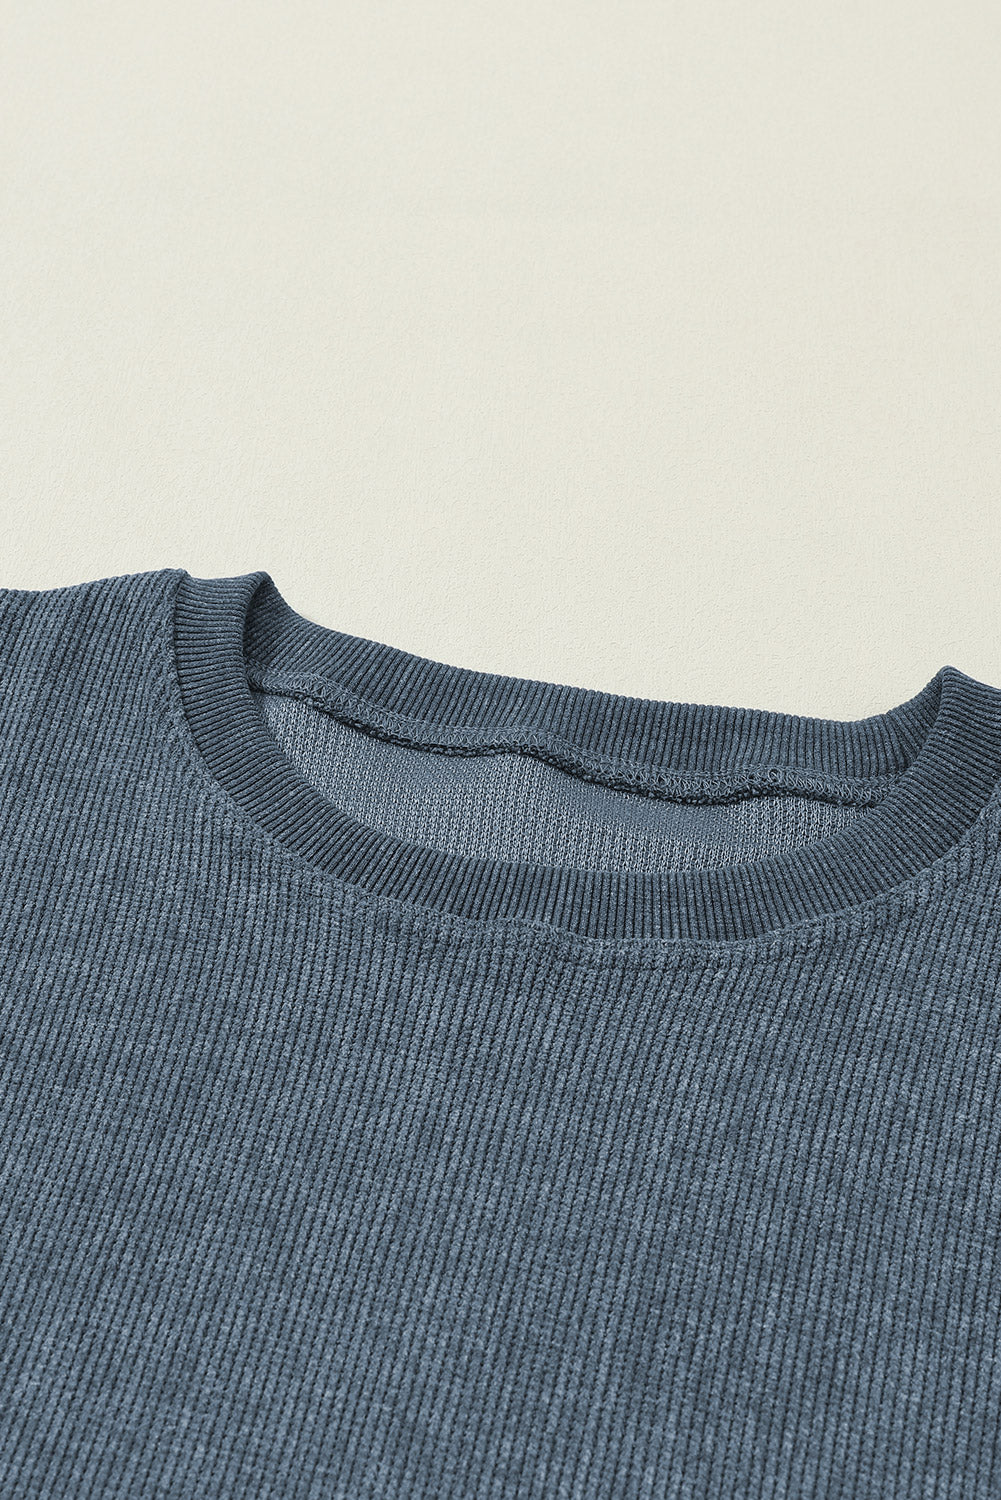 Blue Solid Ribbed Knit Round Neck Pullover Sweatshirt